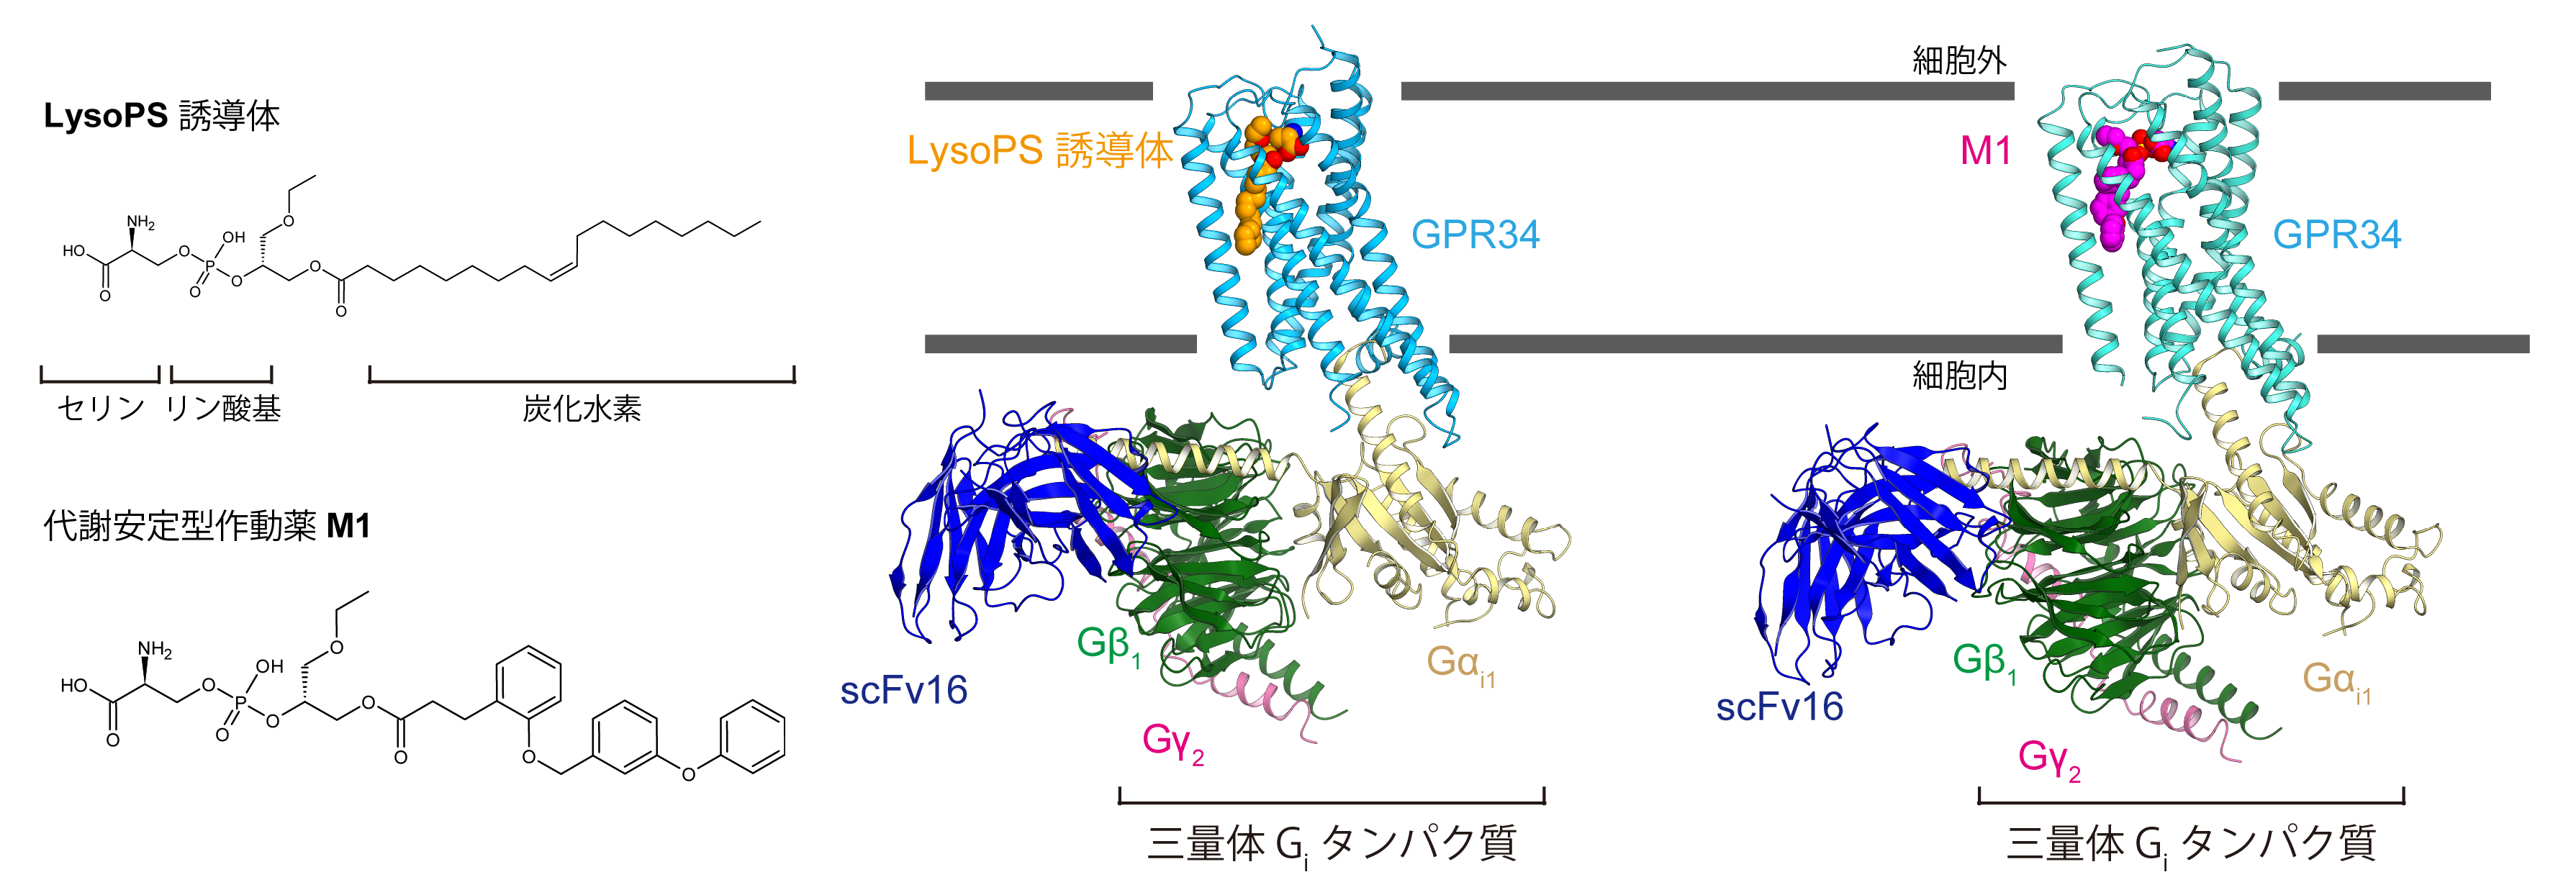 Structure of the active form of the LysoPS receptor involved in immune responses